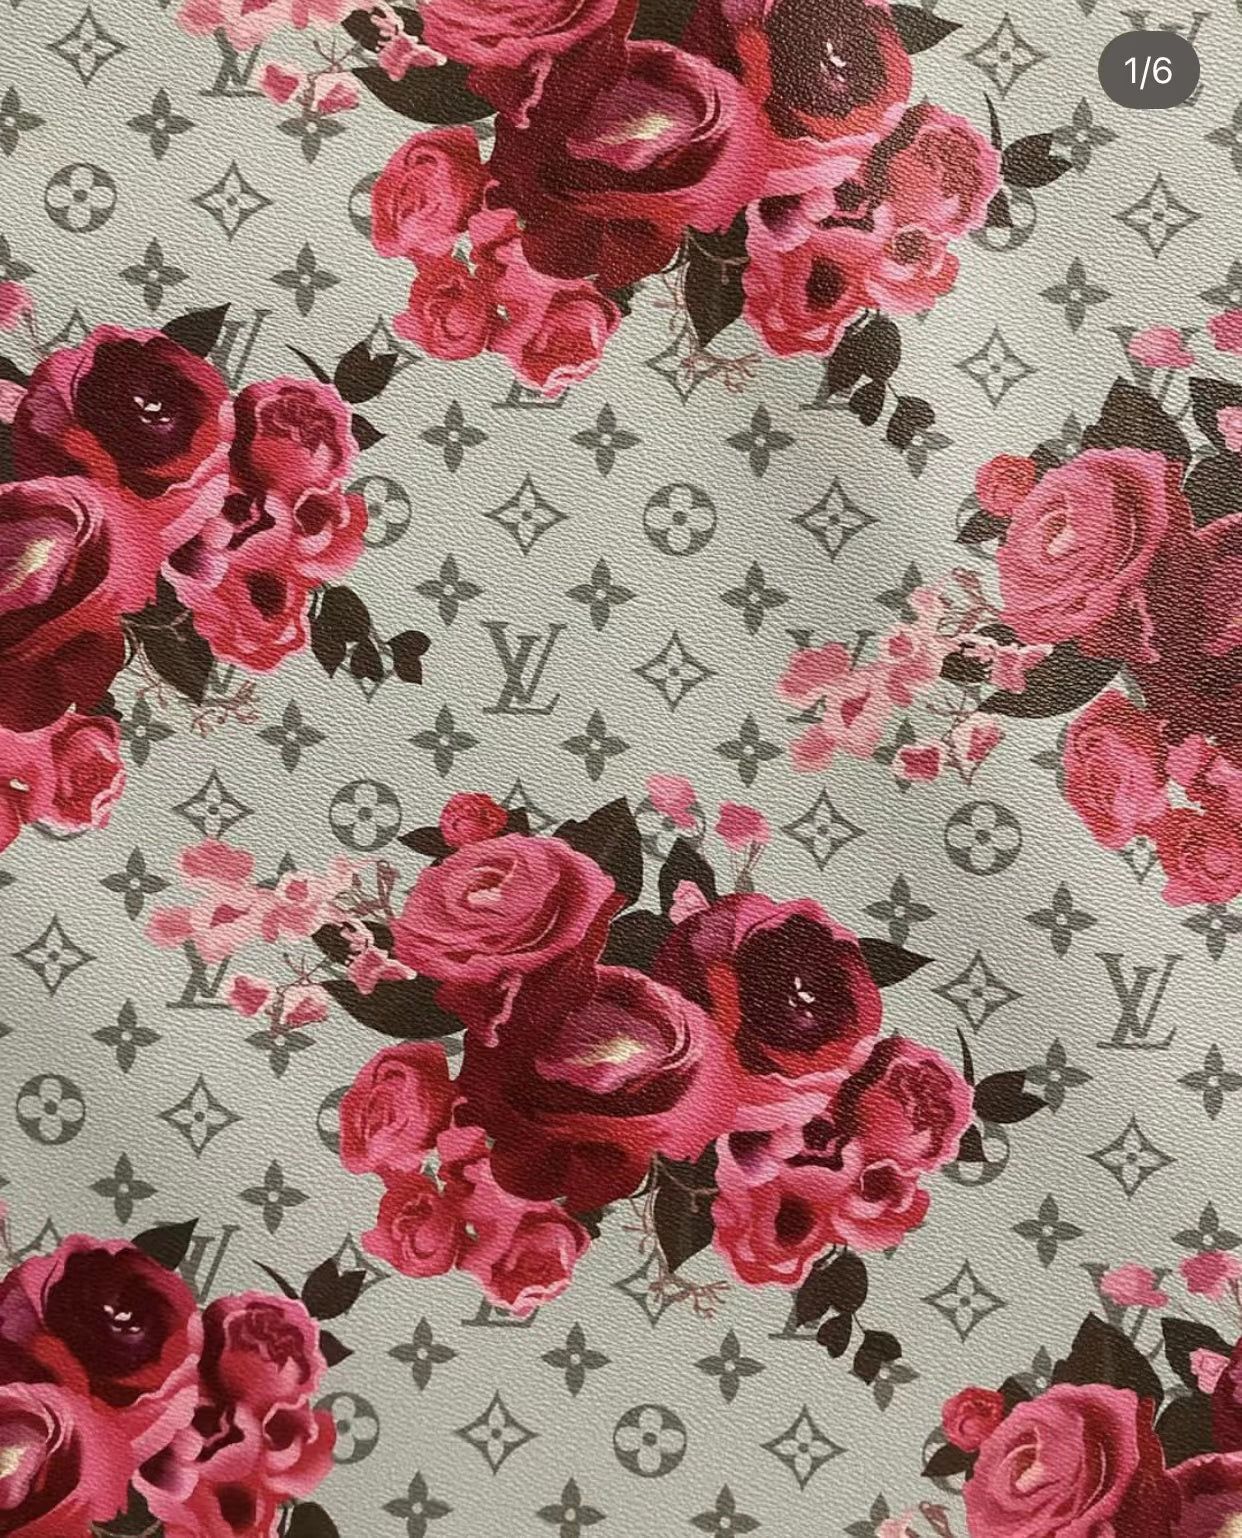 Rose Crafts Handmade LV Designer Leather Fabric for Custom Sneakers and Bag